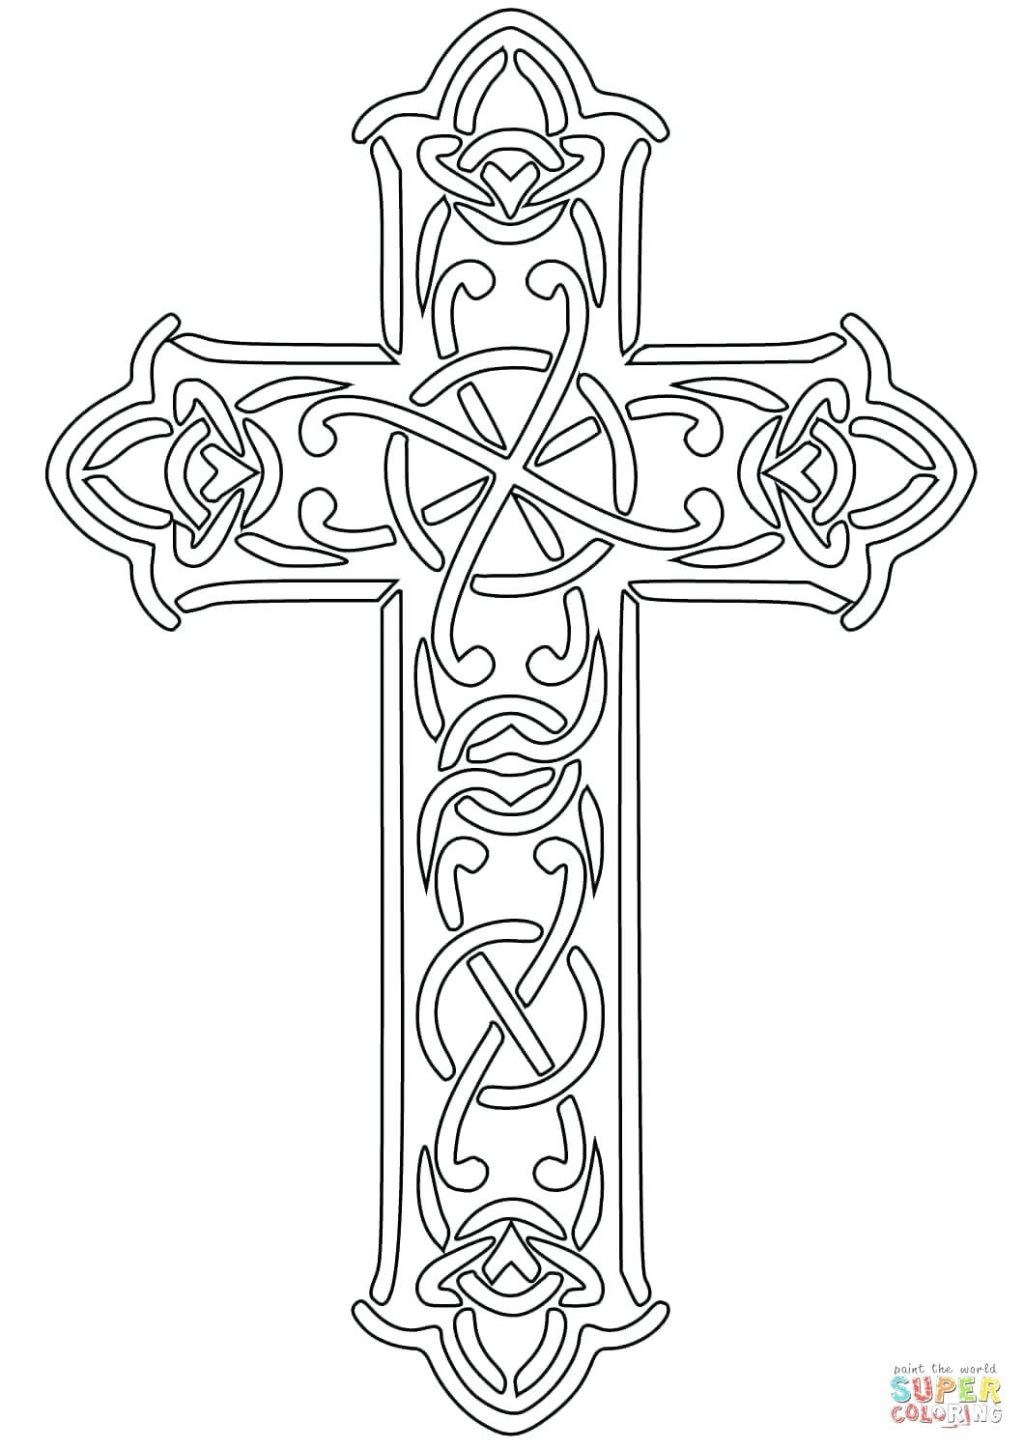 Coloring Pages Of Crosses With Flowers Cross With Flowers Coloring Pages Wiring Diagram Database